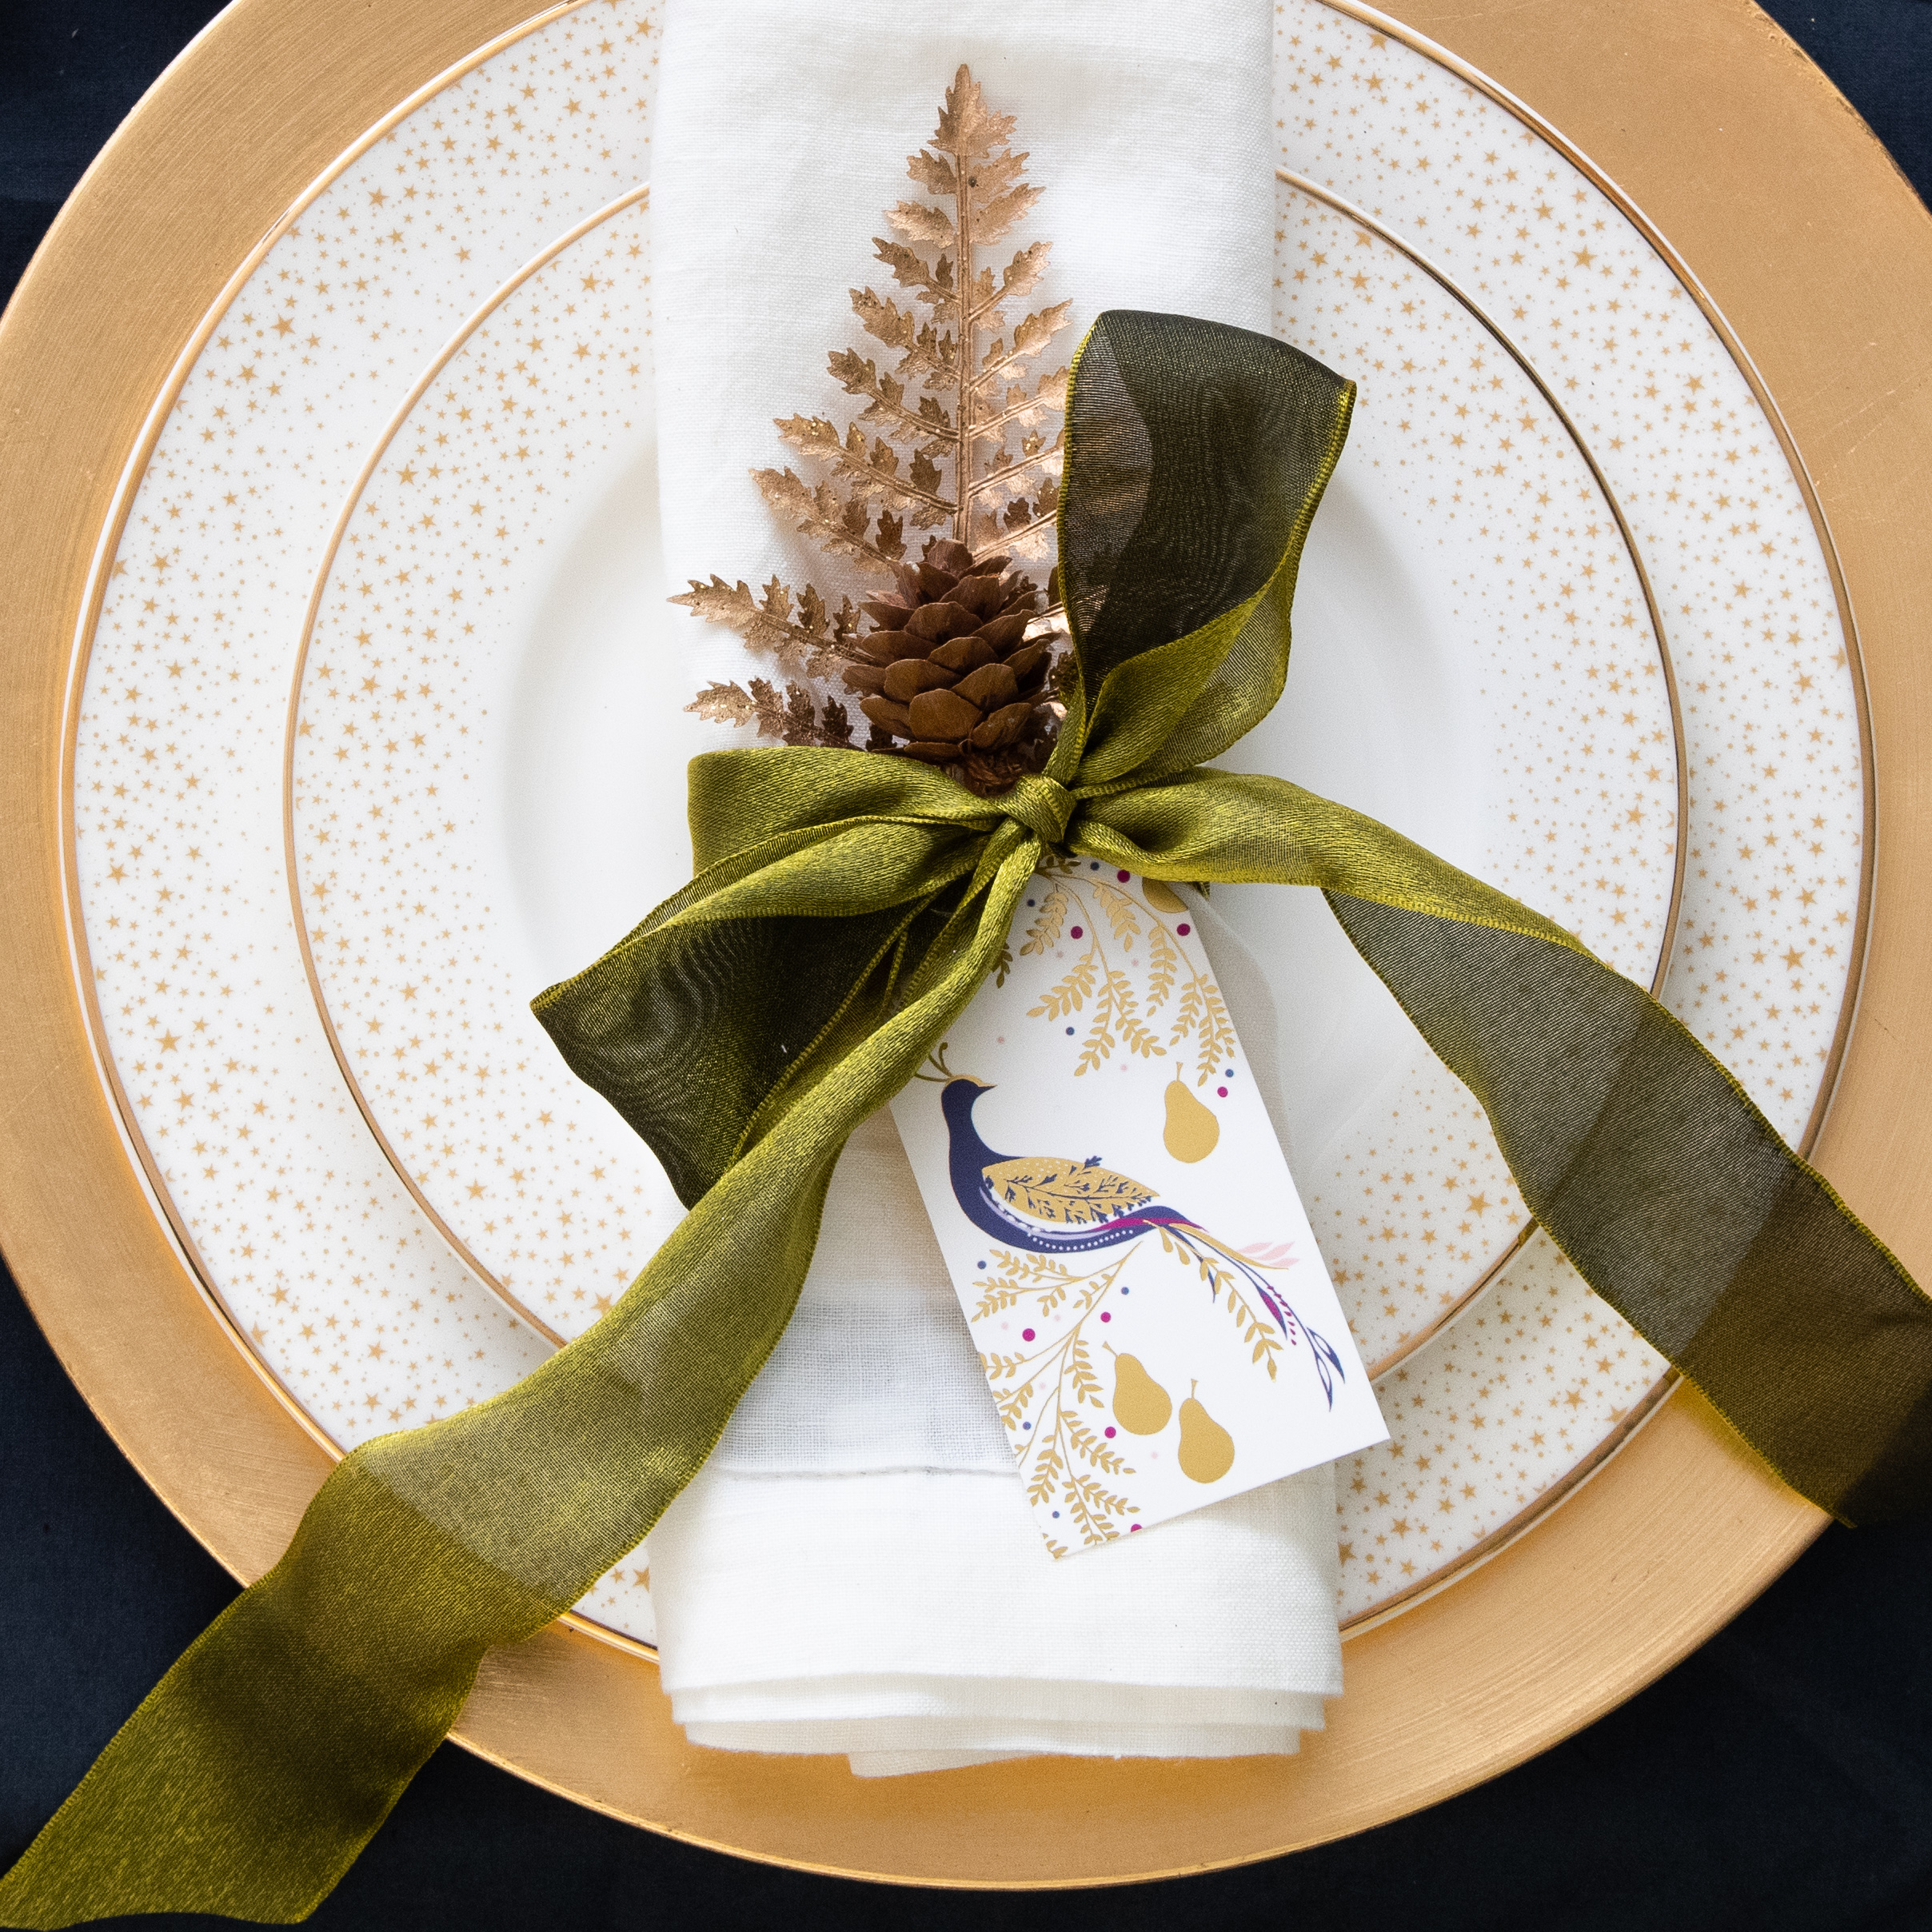 Elevate Your Festive Feast: 4 Stunning Christmas Table Looks